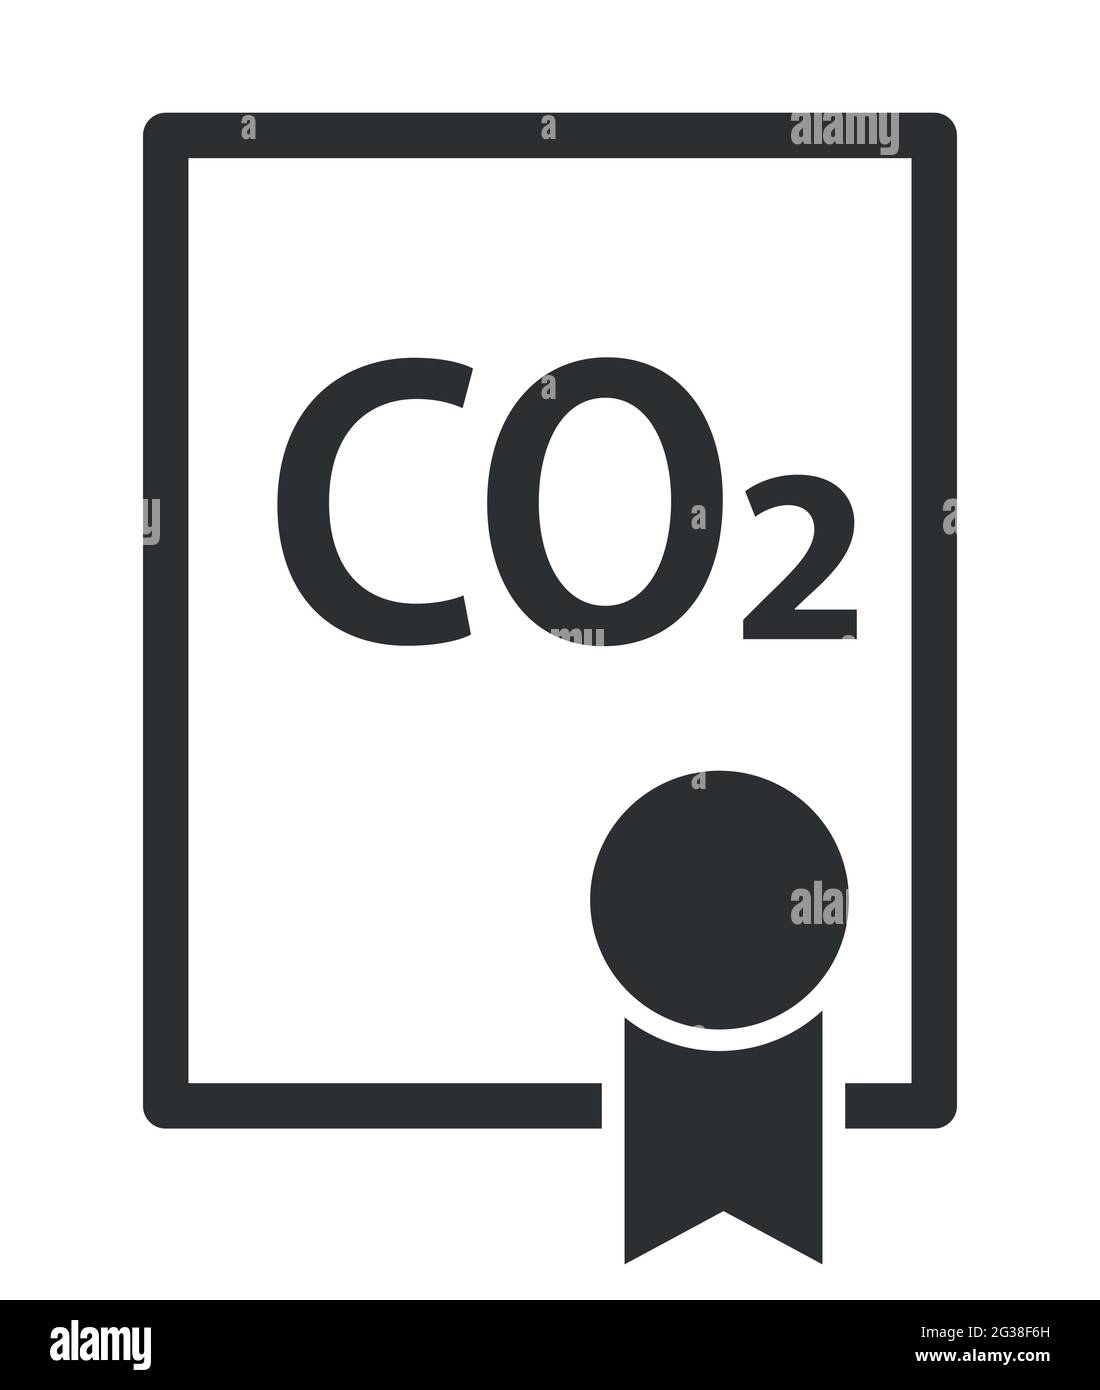 Co2 emissions trading symbol license vector icon Stock Vector